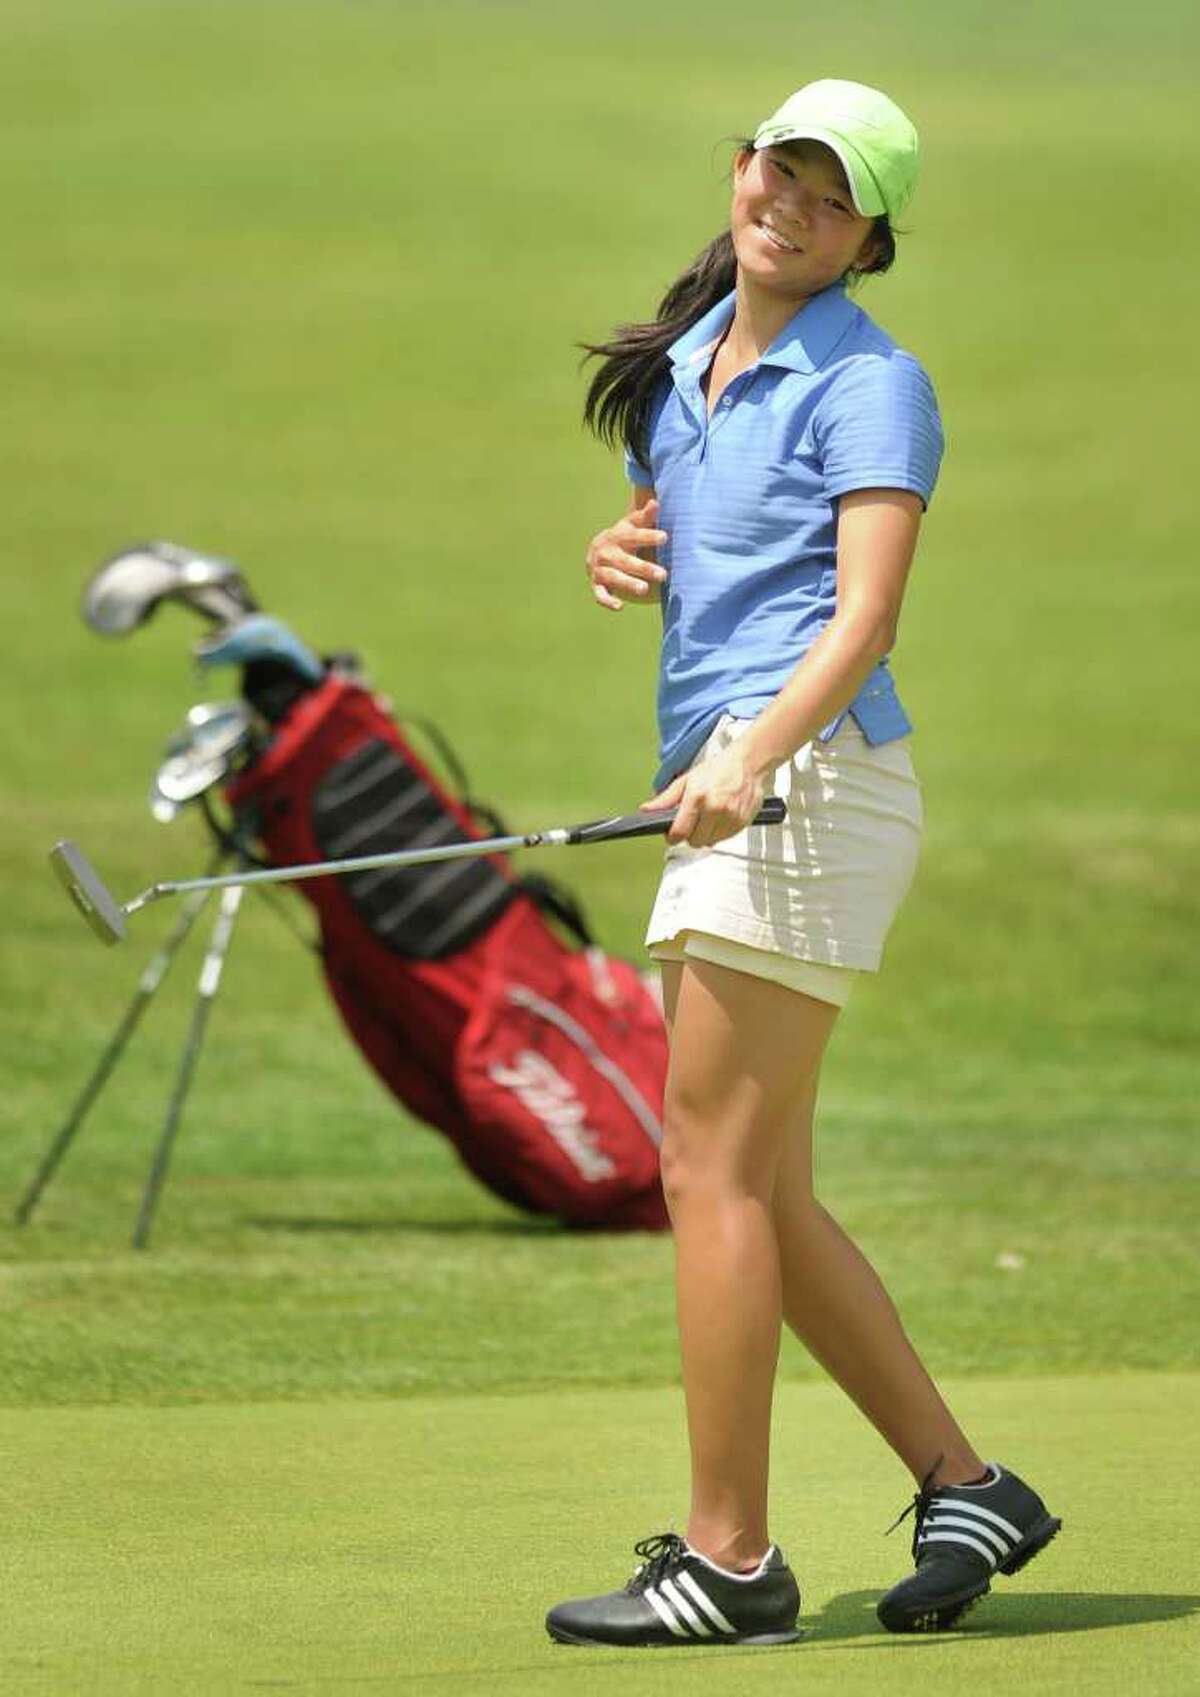 Darien's Izzy Lee reacts to nearly making a long putt on the 16th green at the 2011 Girls Golf State Tournament at Orange Hills Country Club in Orange on Tuesday, June 7, 2011.